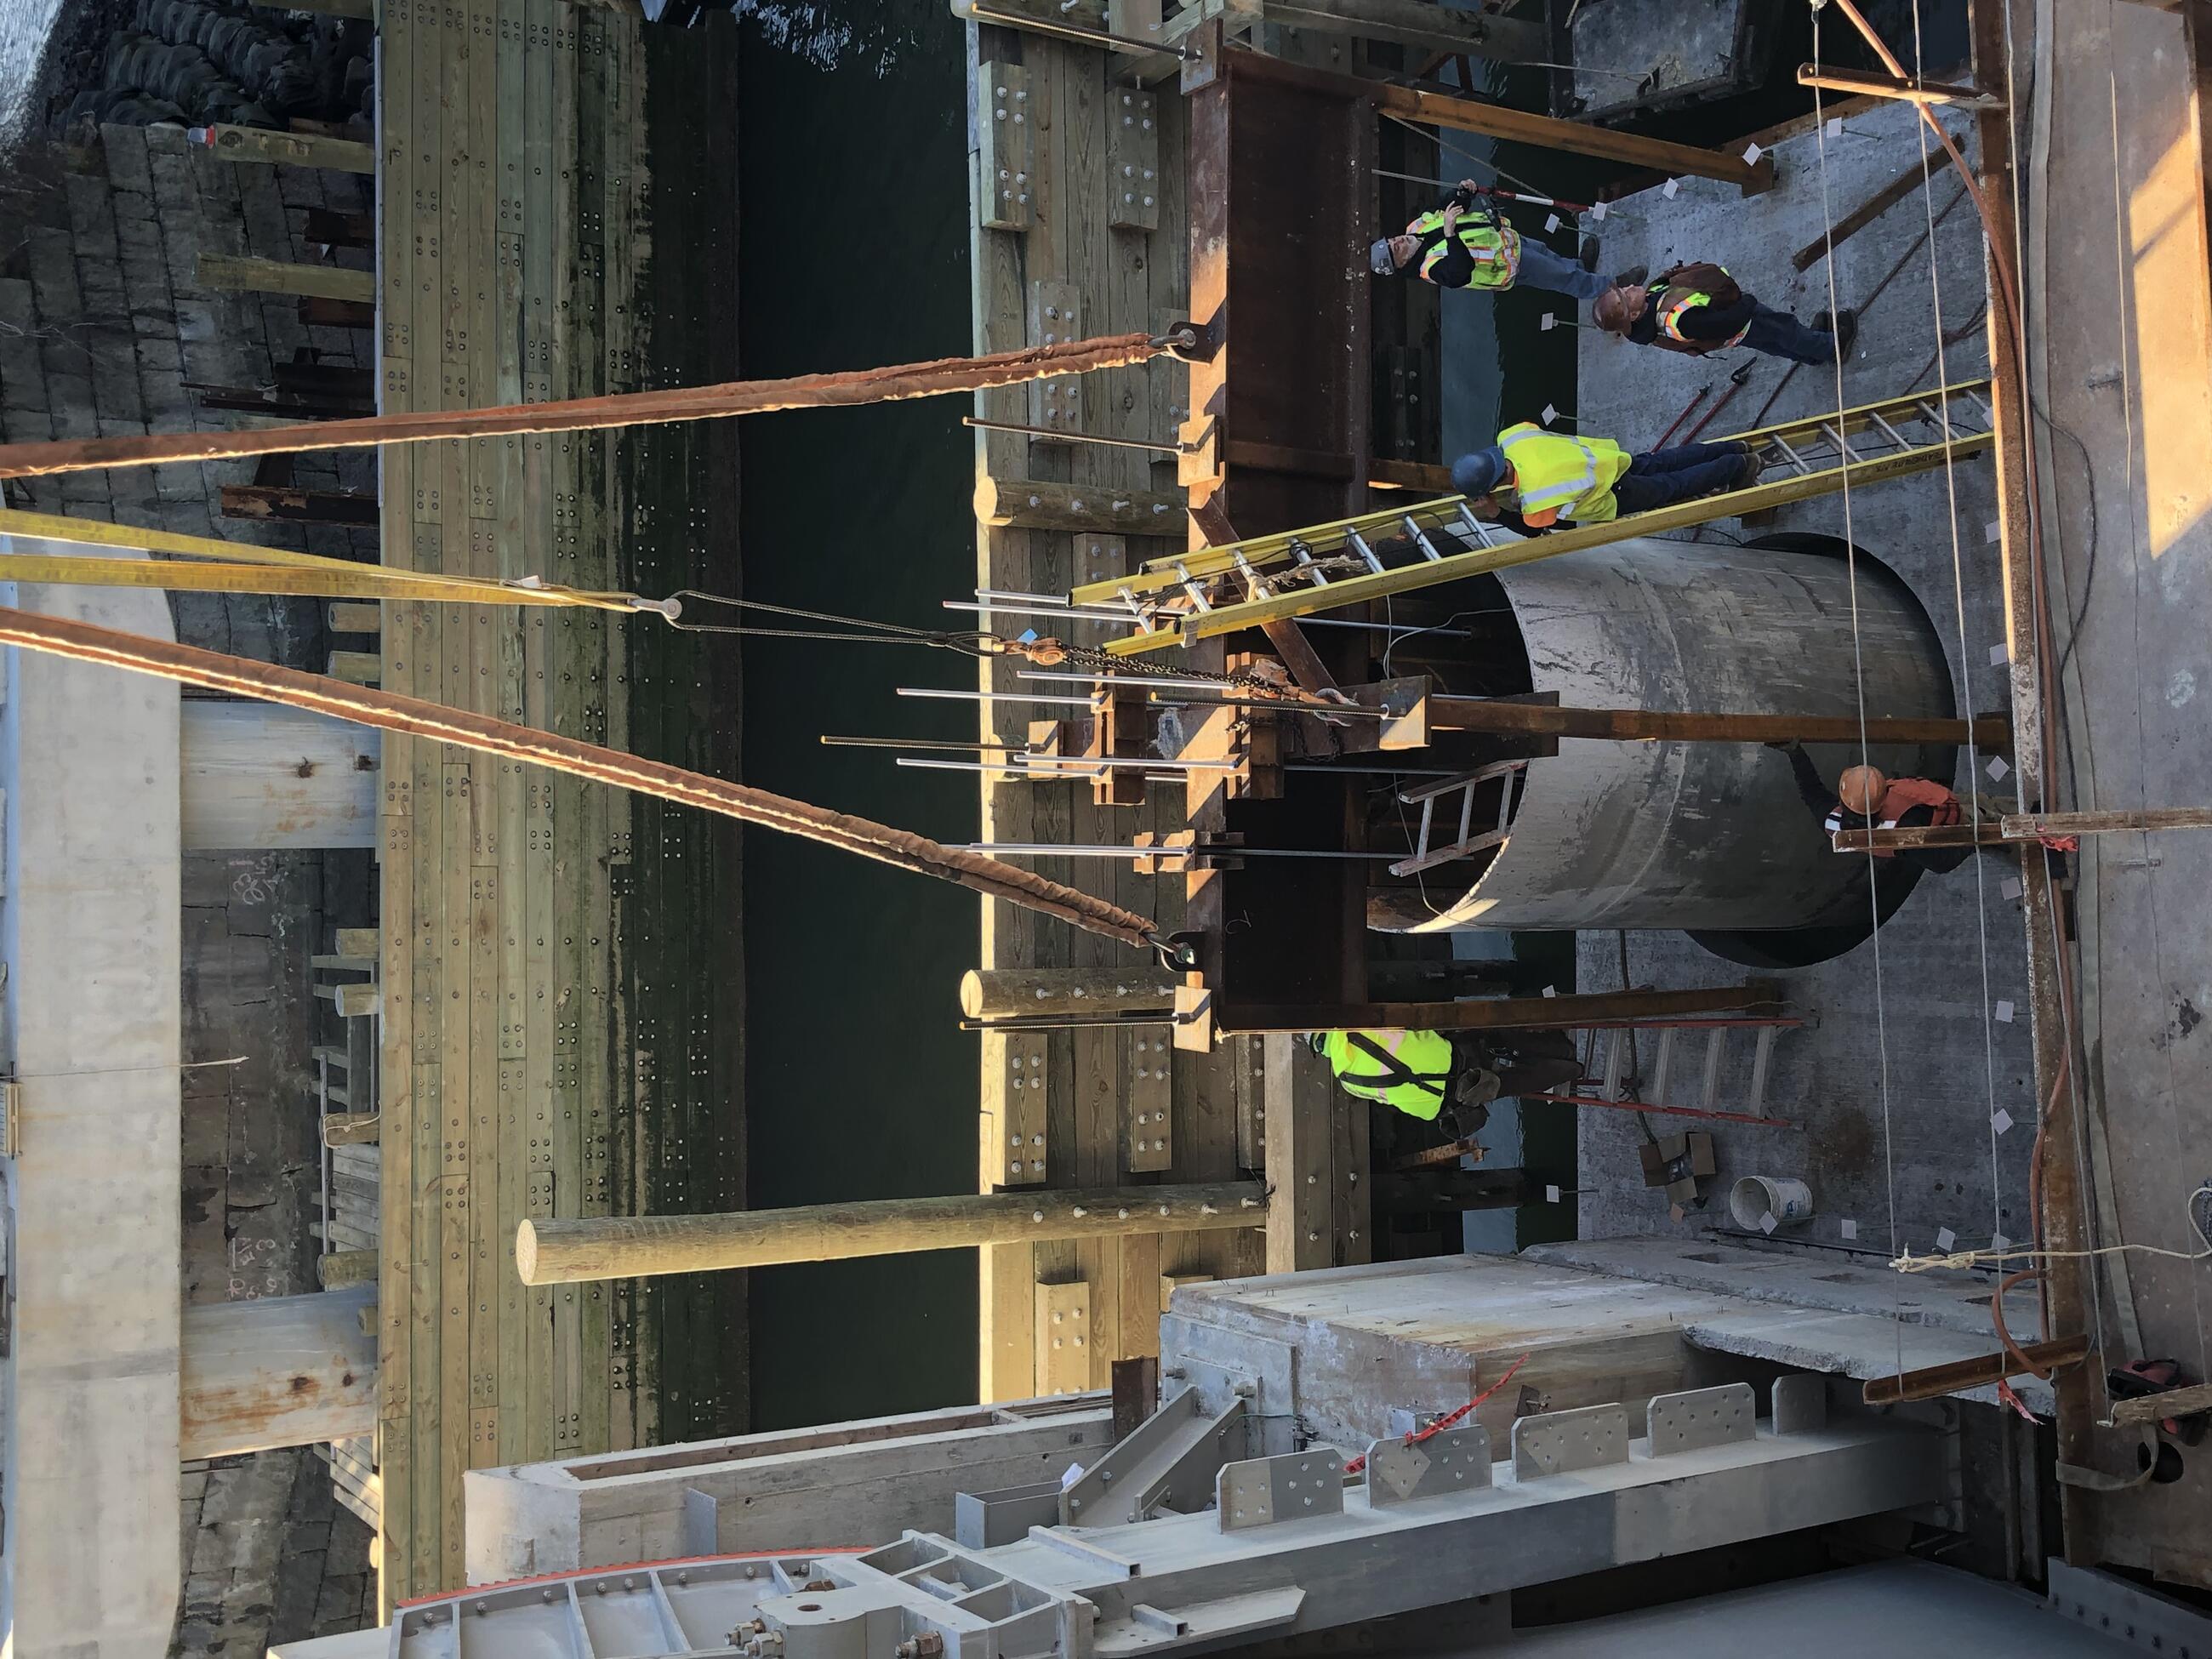 Five workers stand on (or on ladders resting on) a precast, poured-cement footing panel just after it has been lowered into place. Suspension cables are still attached to the footing.